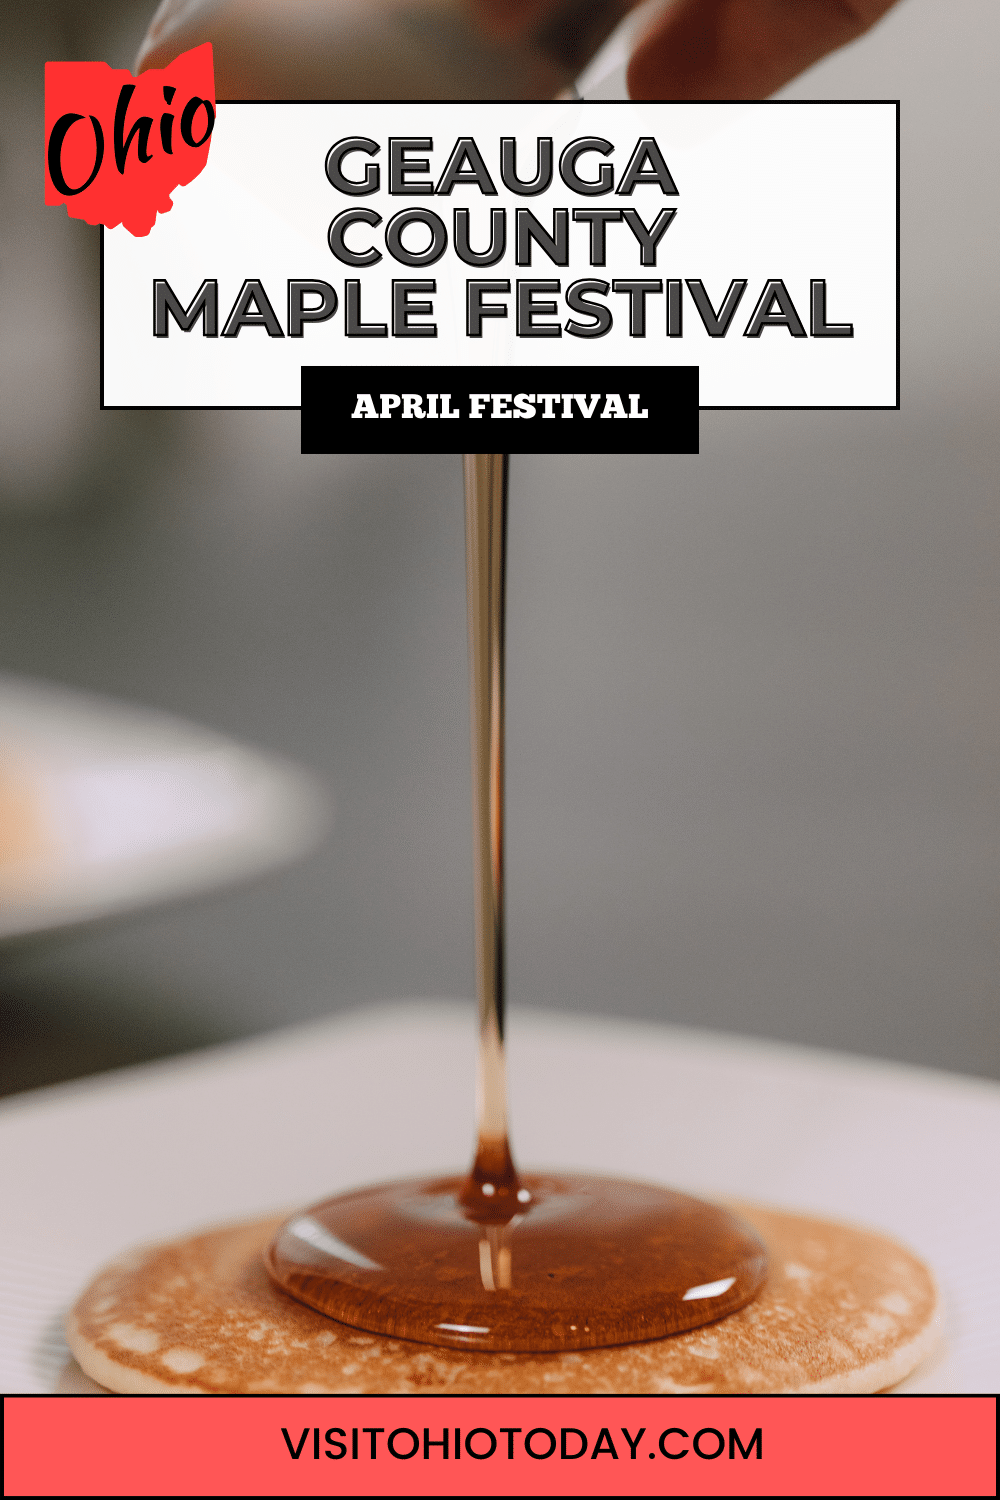 The Geauga County Maple Festival, a family-friendly event honoring maple syrup, occurs in late April at Chardon Square in Chardon.